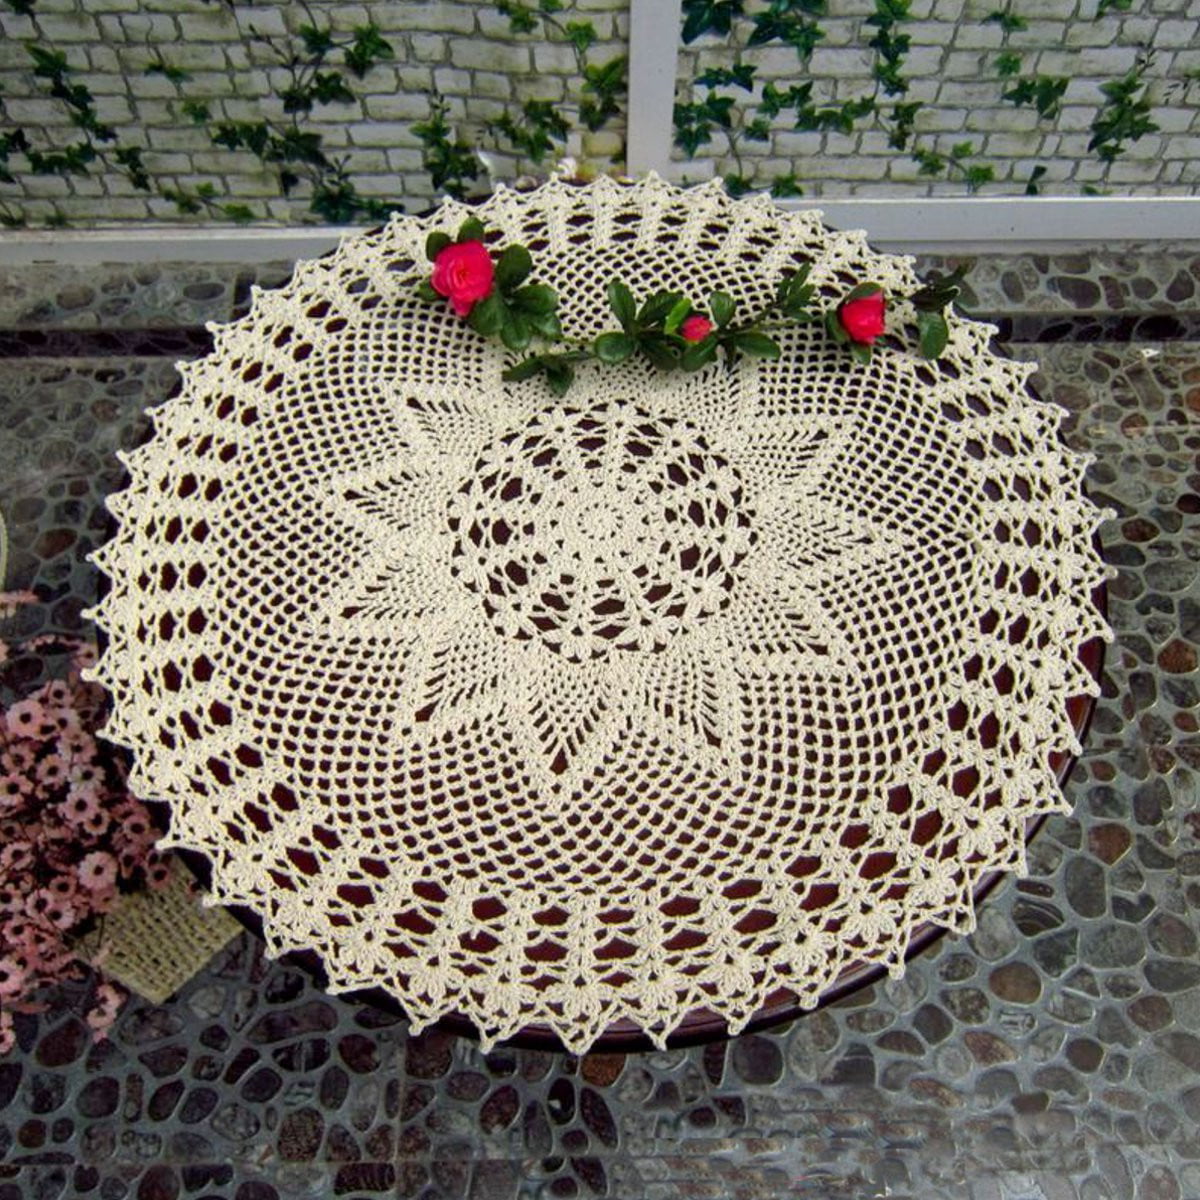 Vintage Tablecloth Round Rectangle Hand Crochet Lace Doily TableCover Decor New 